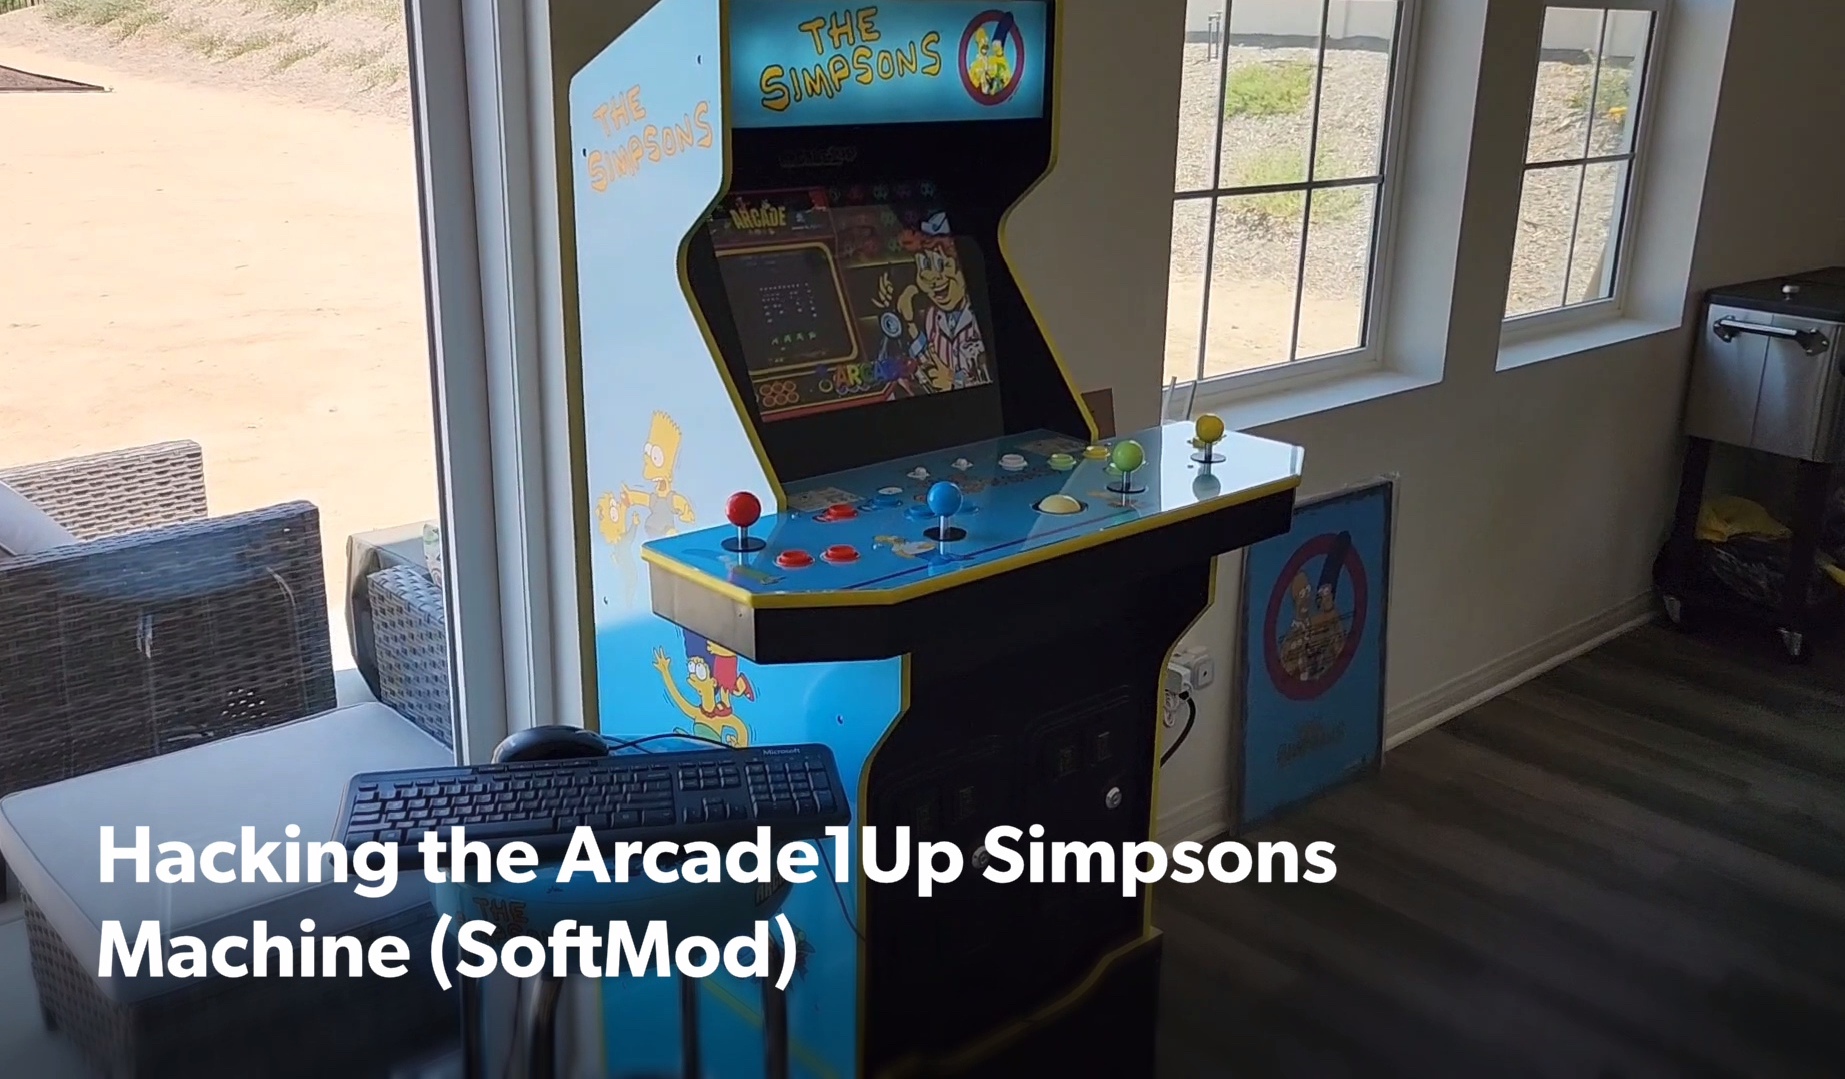 How I Hacked the Arcade1Up Simpsons Machine (Softmod) to Play